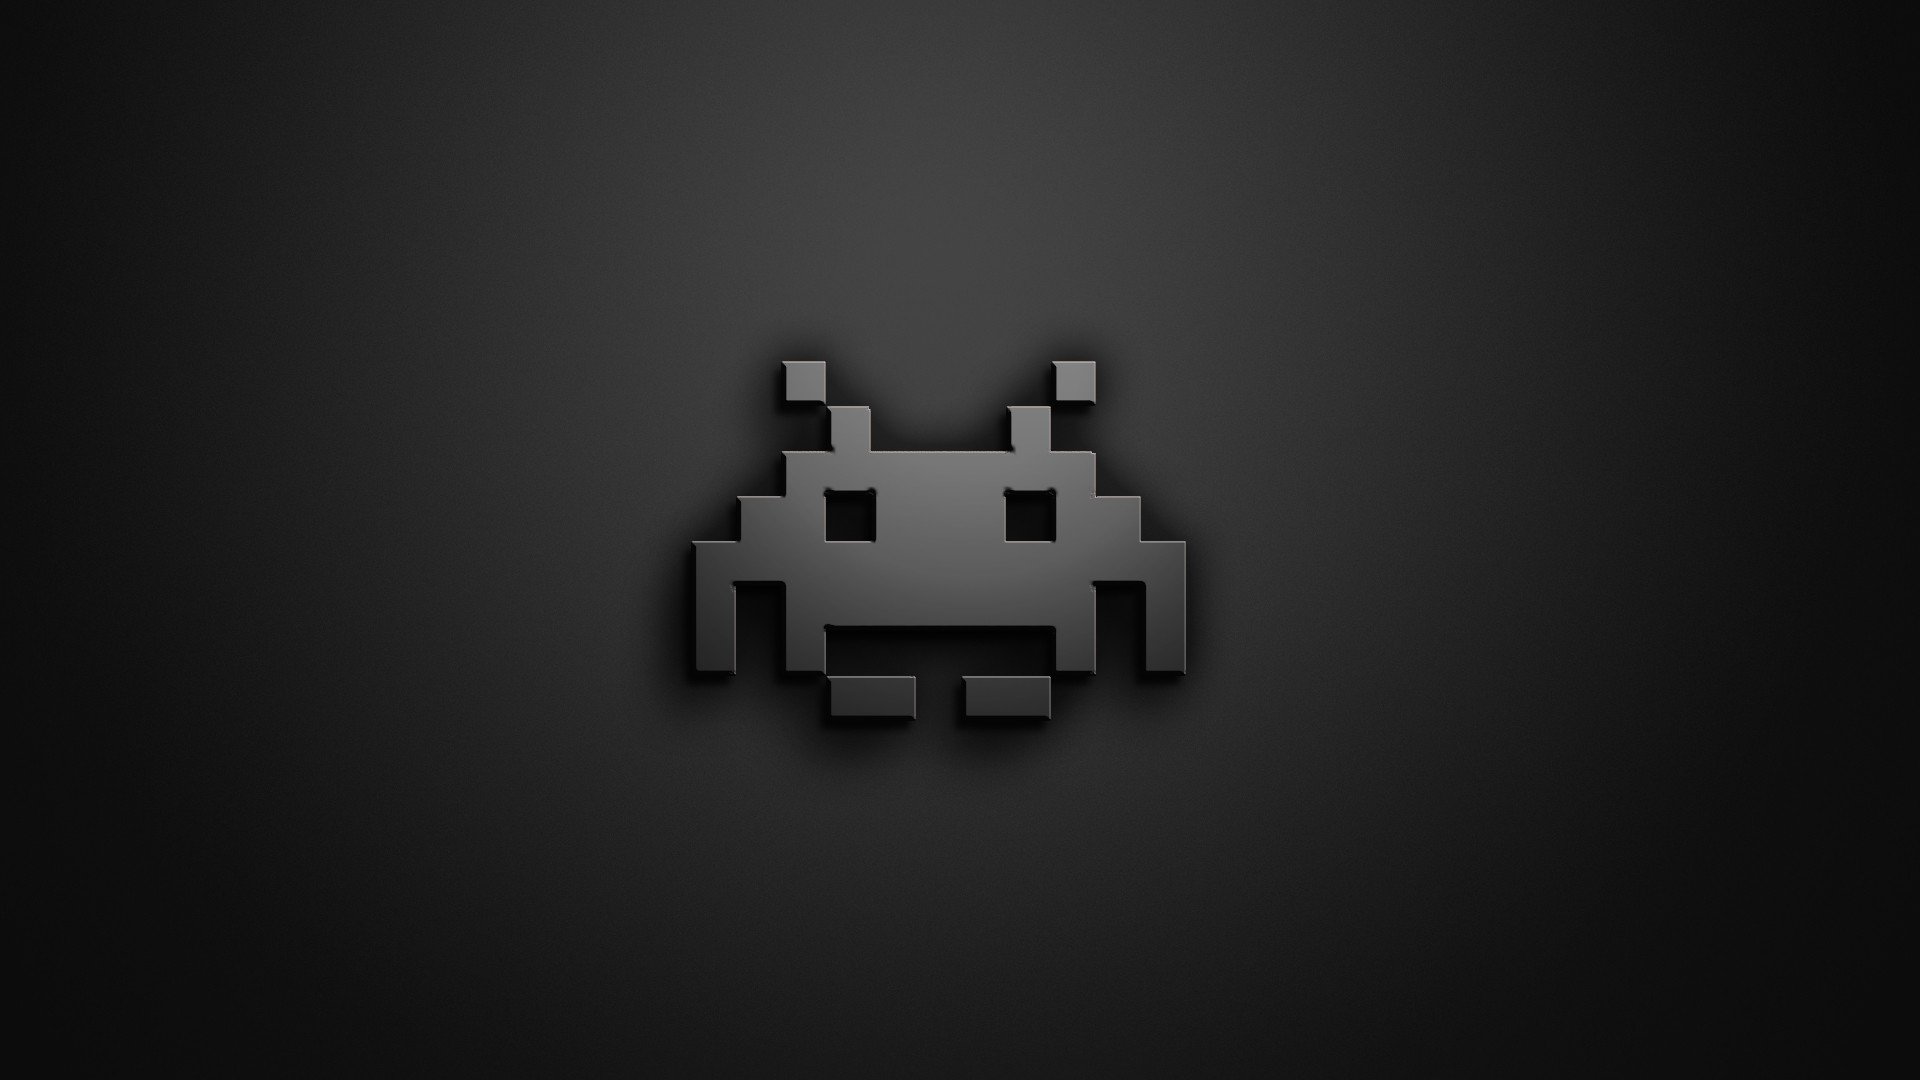 space invaders wallpaper